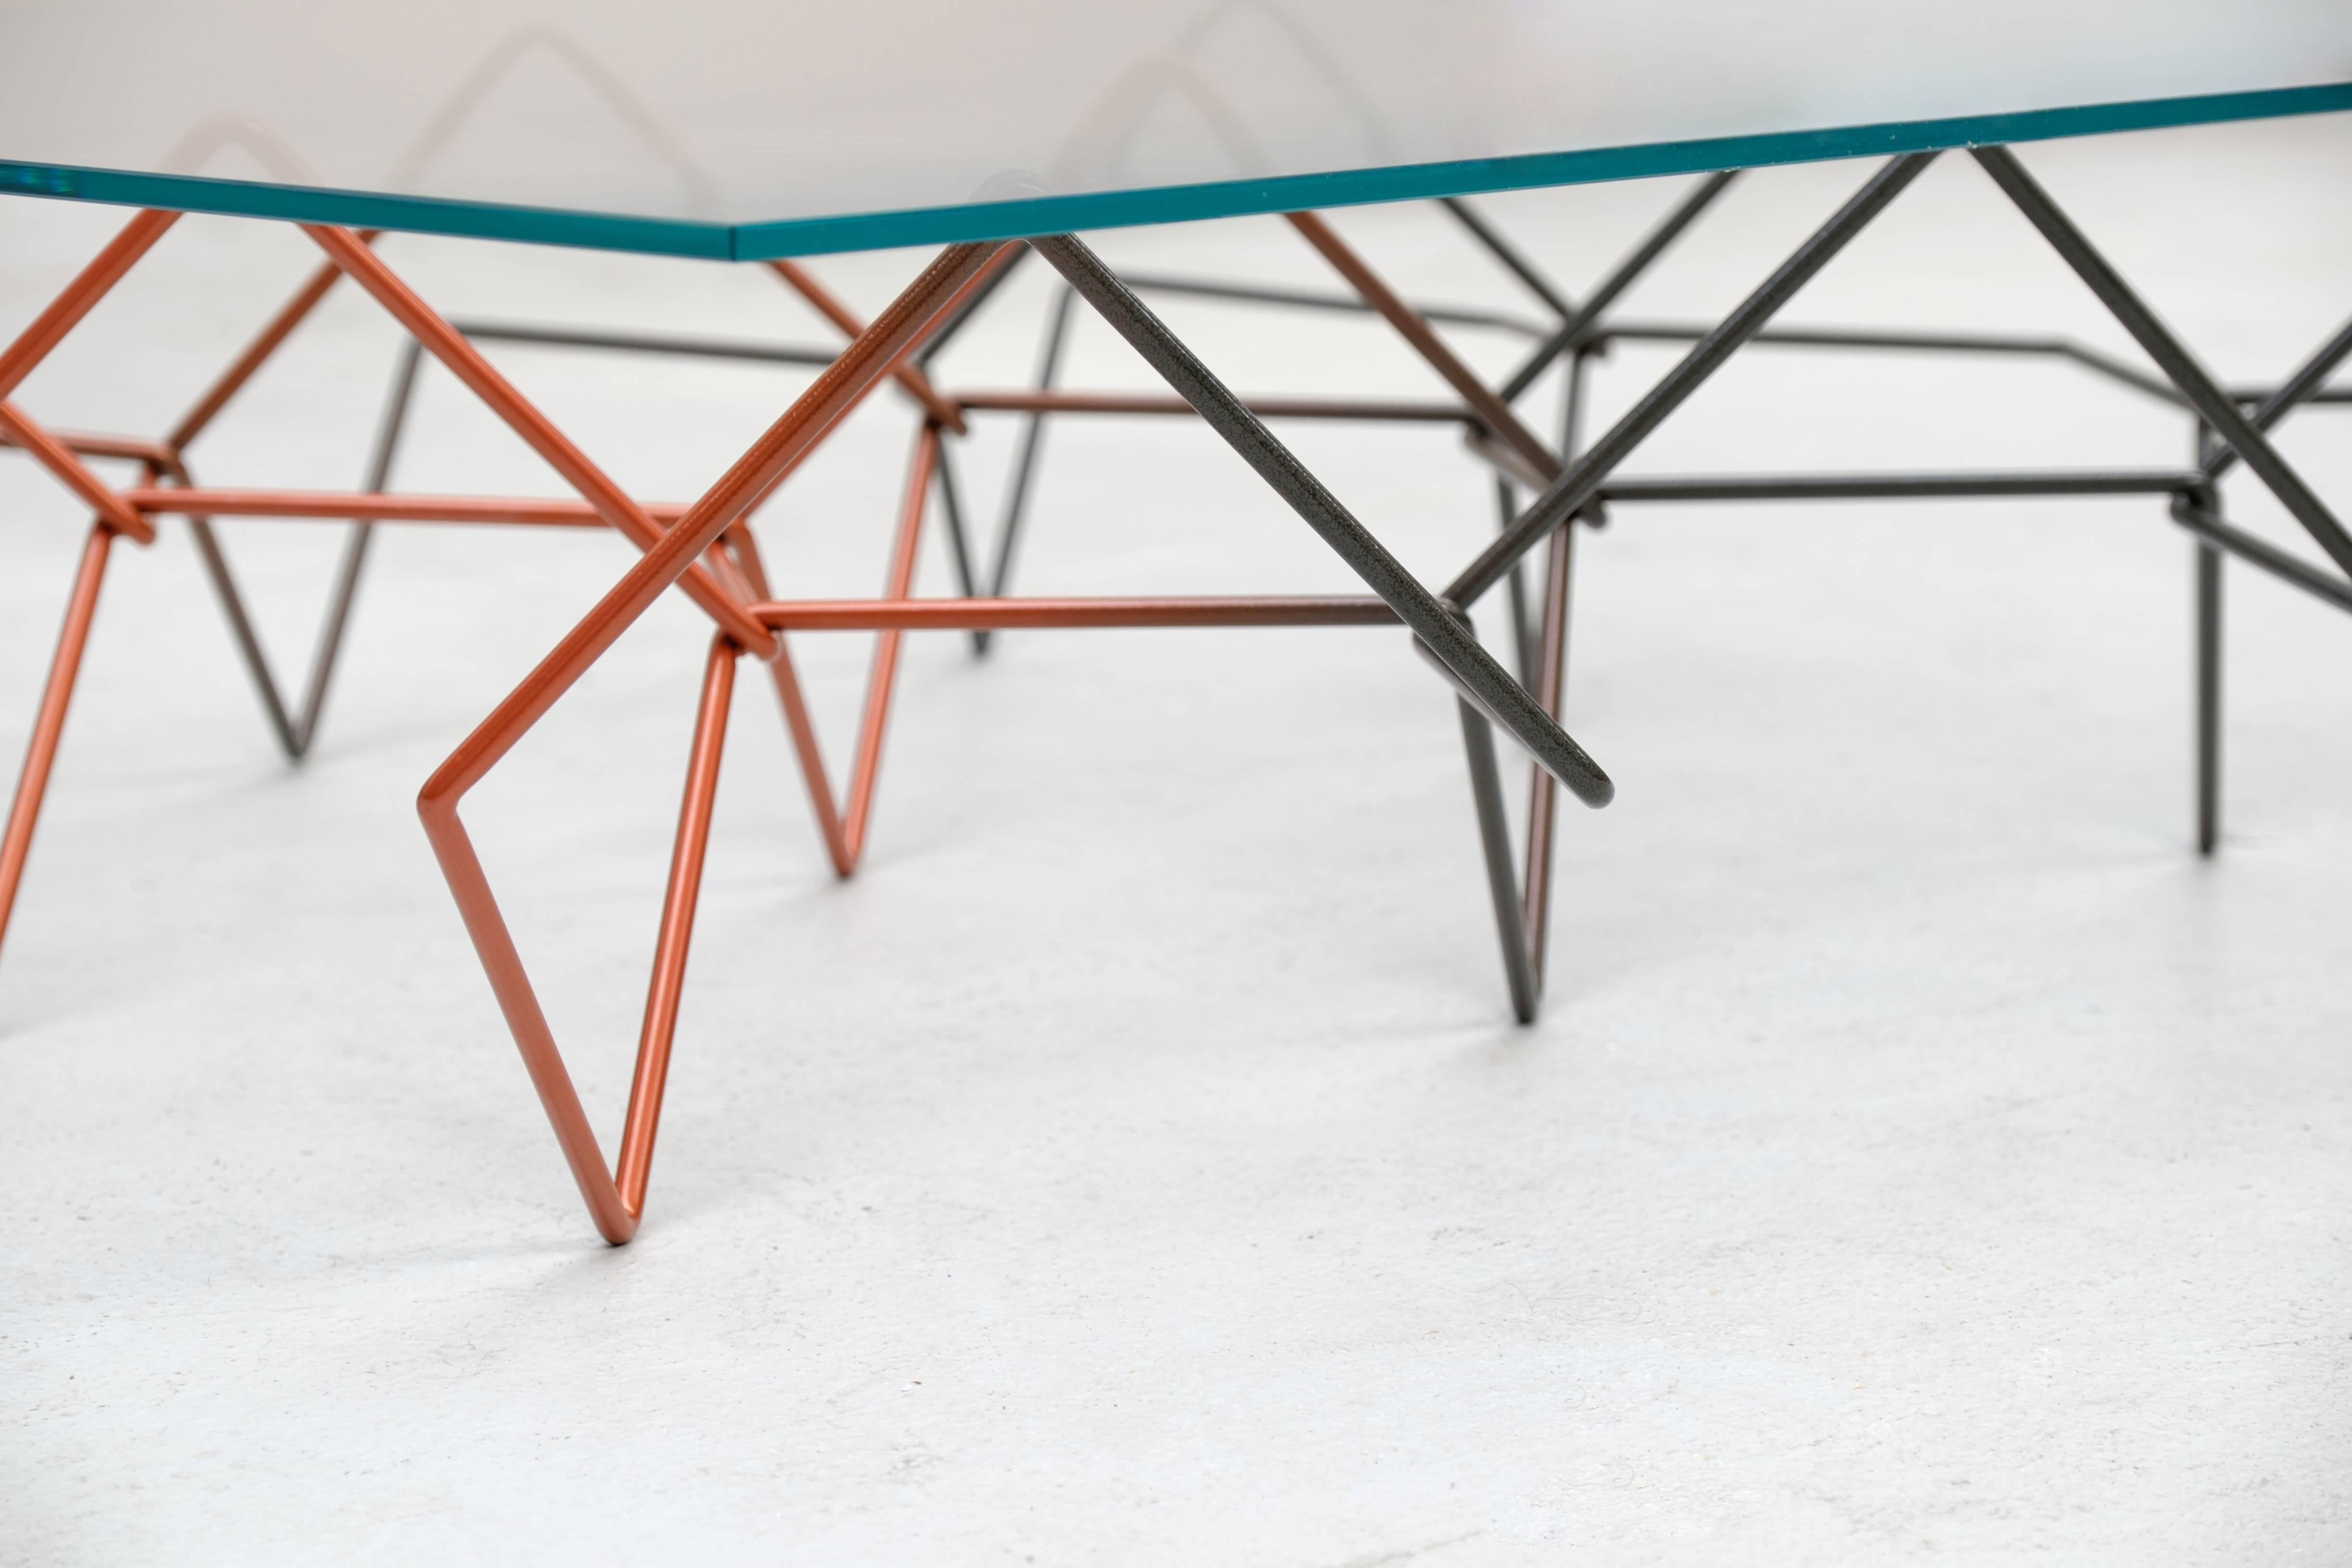 The Seismic coffee table was inspired by the movement and vibrations that occur in an earthquake. Three-dimensional bent and woven metal wires create a strong and dynamic structure. A range of rhythmic and geometric patterns can be discovered, when